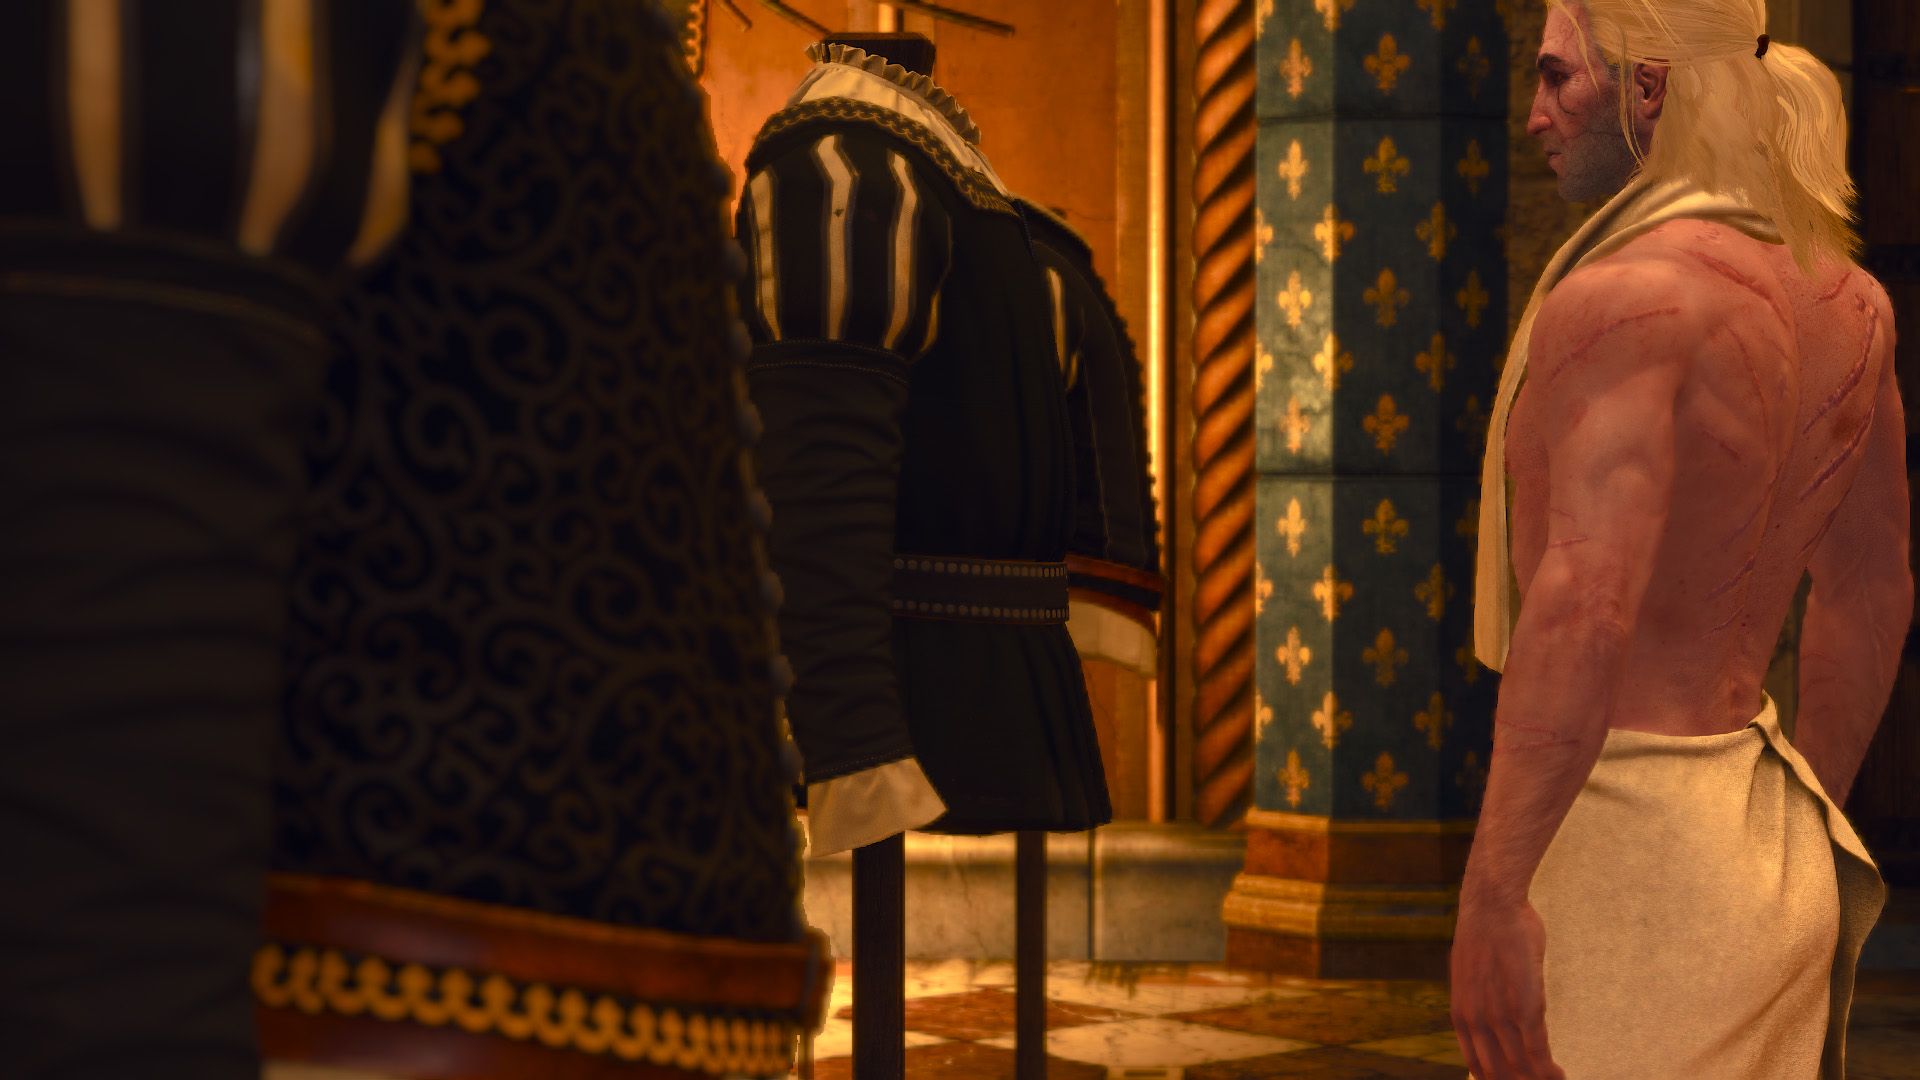 Geralt chooses between three identical looking outfits at a palace.